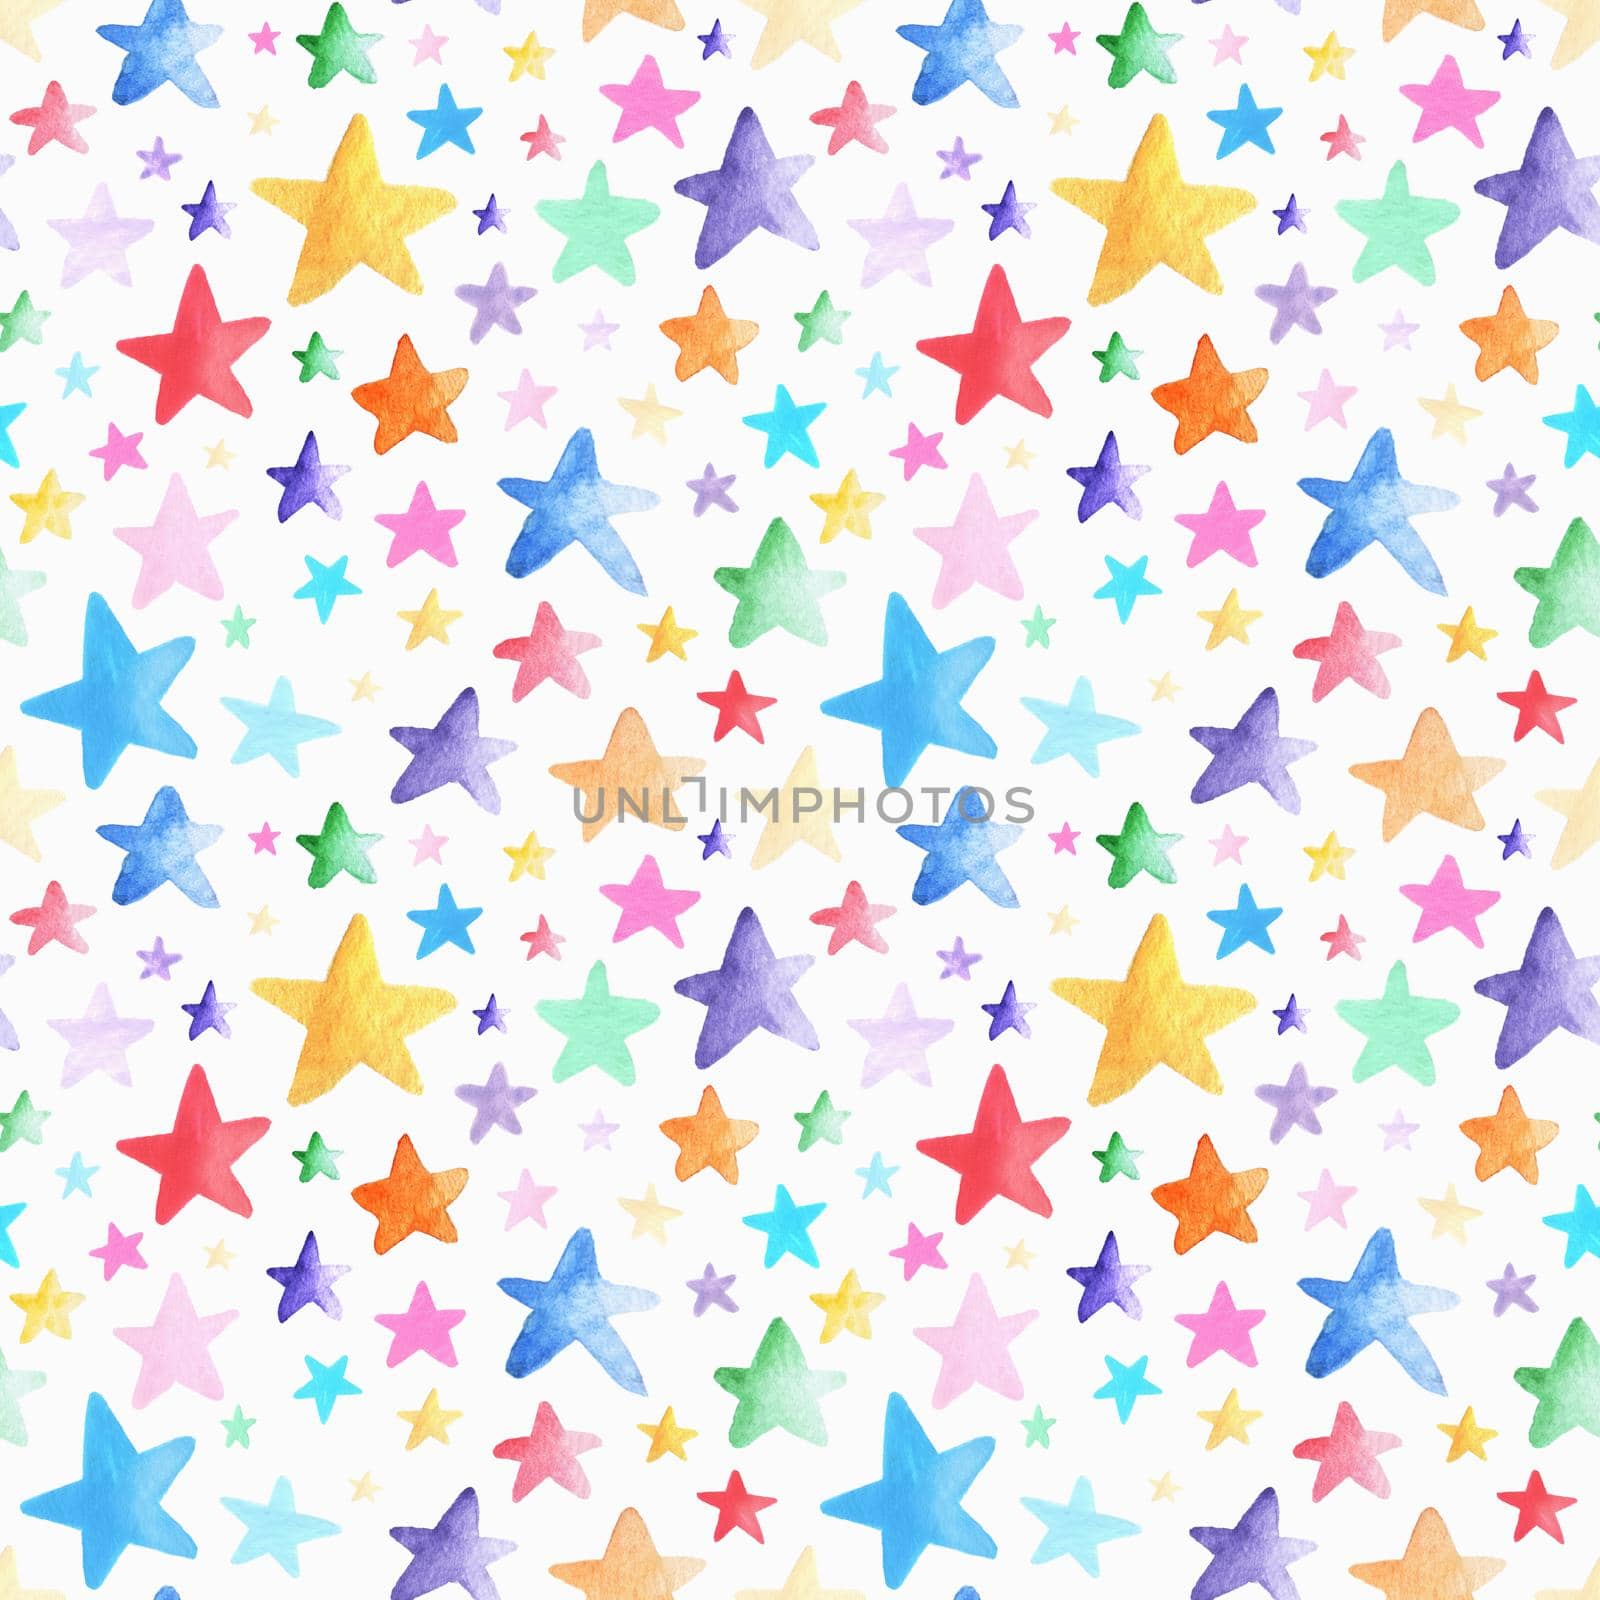 Seamless watercolor pattern. Pattern with colored stars.